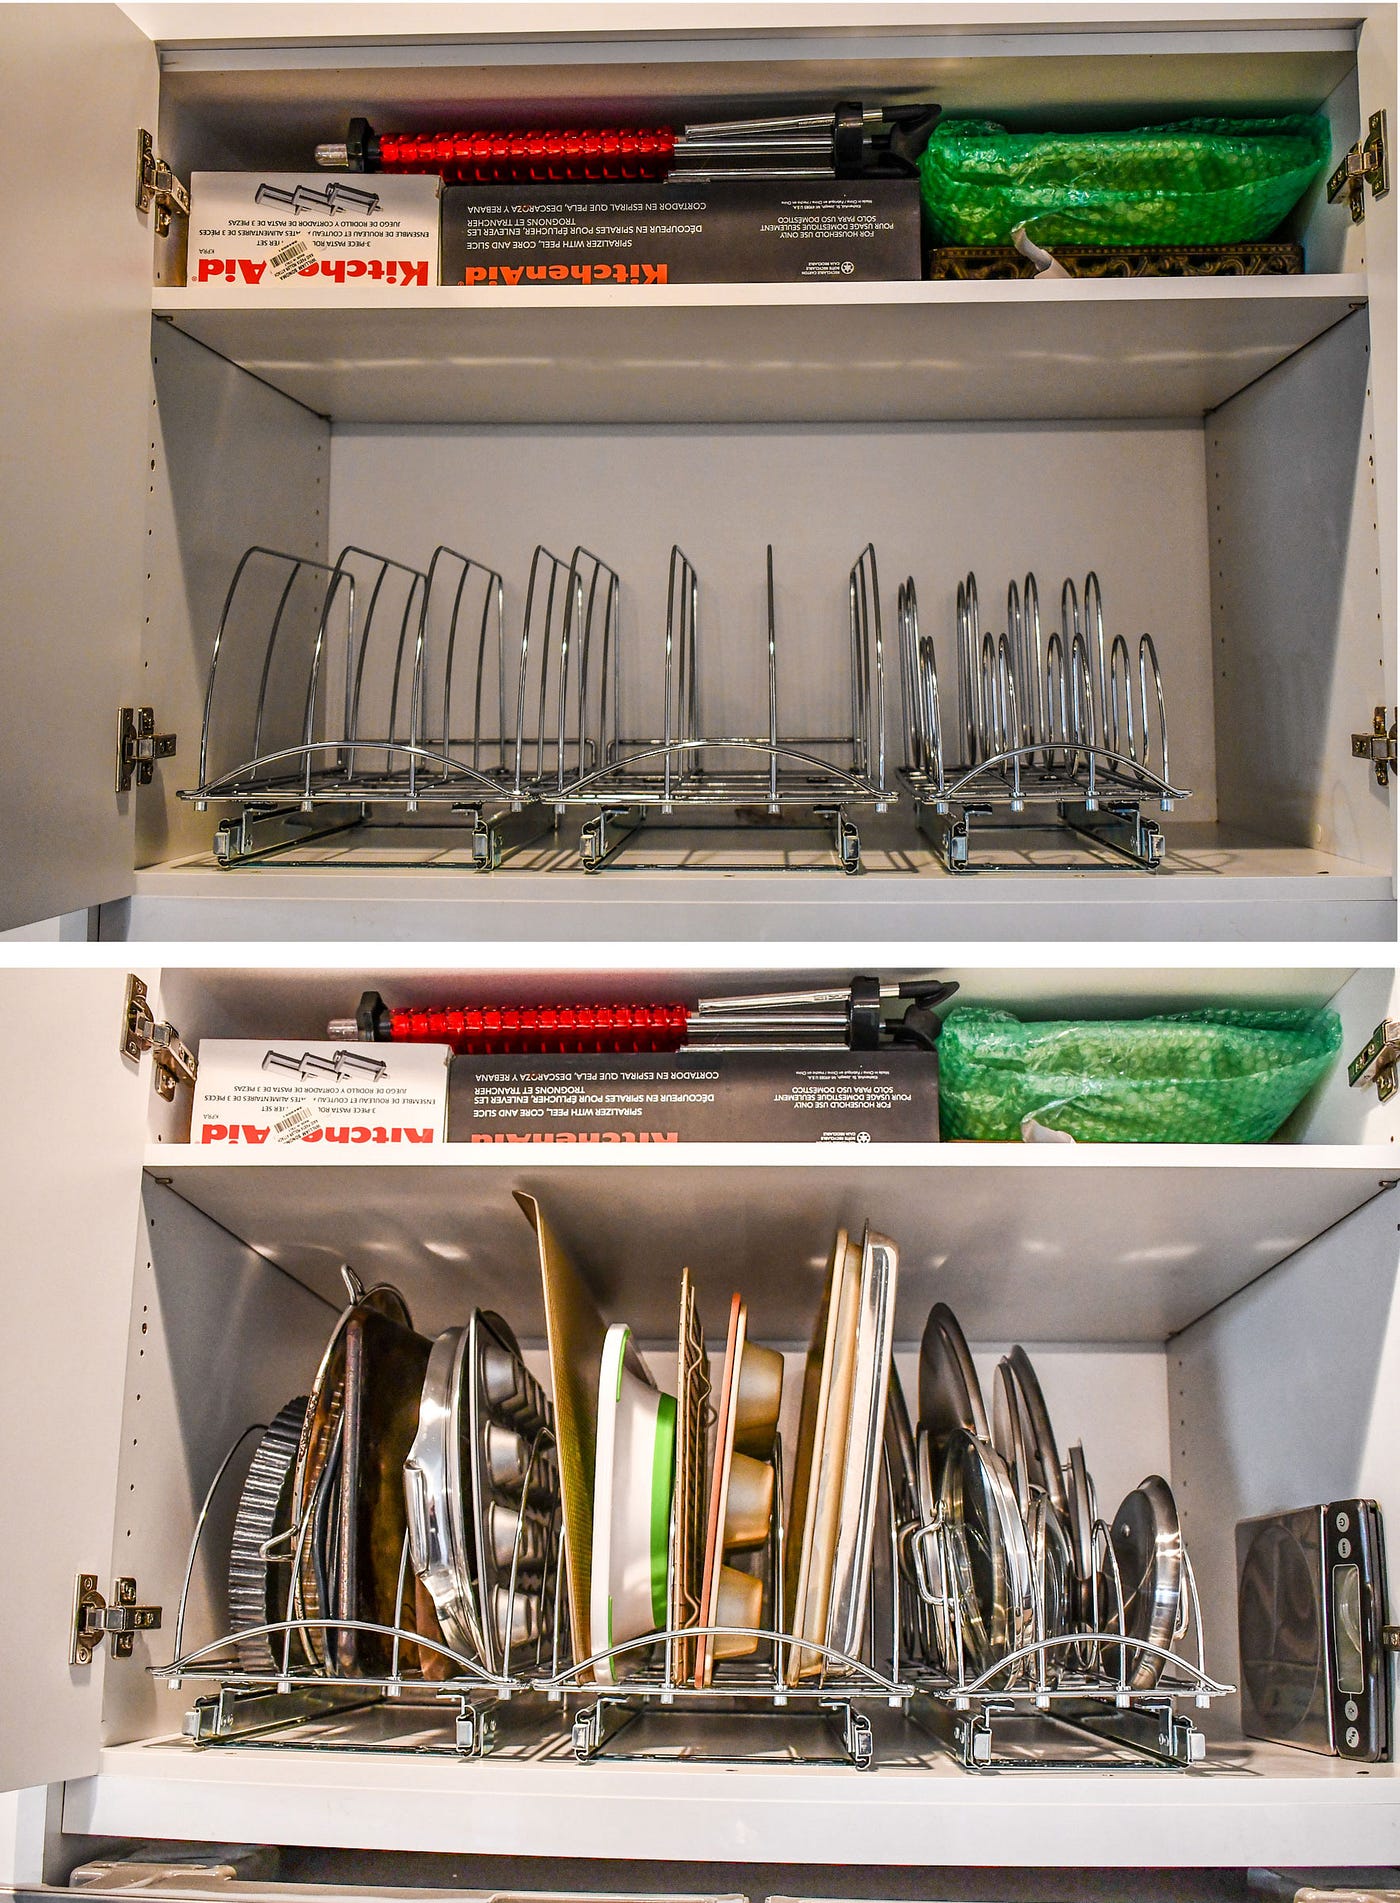 Pull-out Appliance Tray/Stand, Protects Kitchen Cabinets